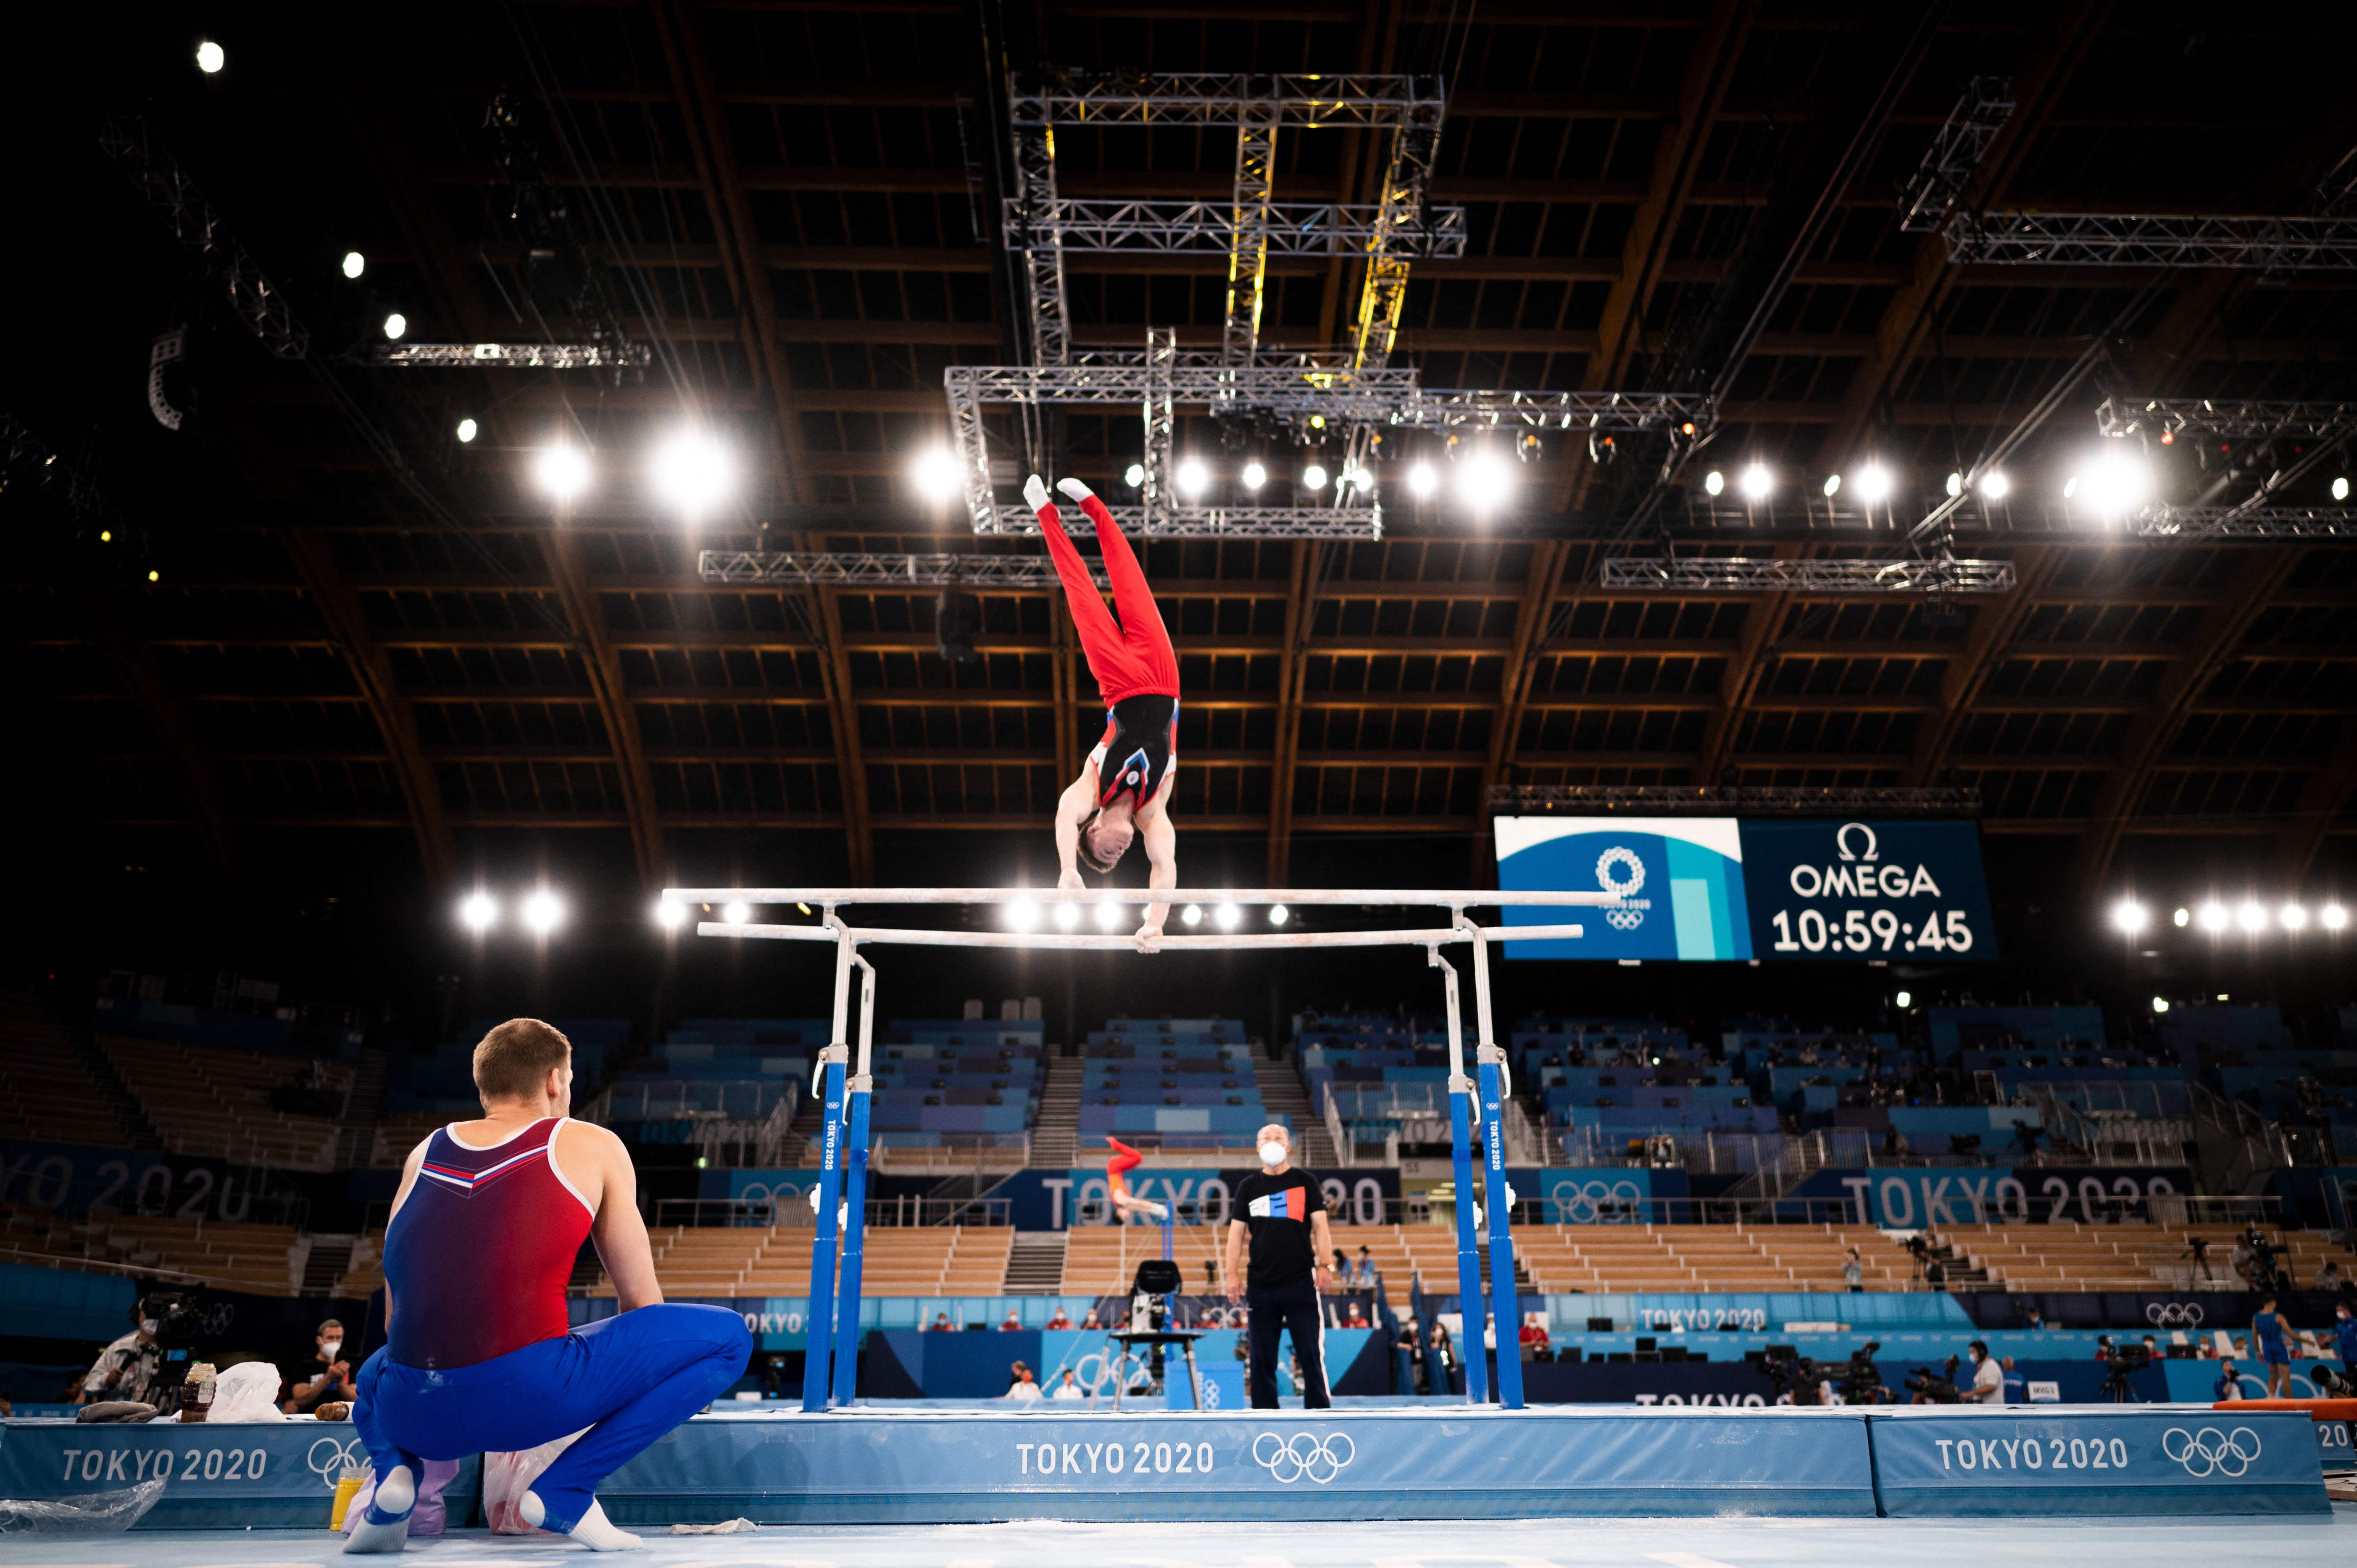 A Russian gymnast takes part in a training session at the Ariake Gymnastics Centre in Tokyo